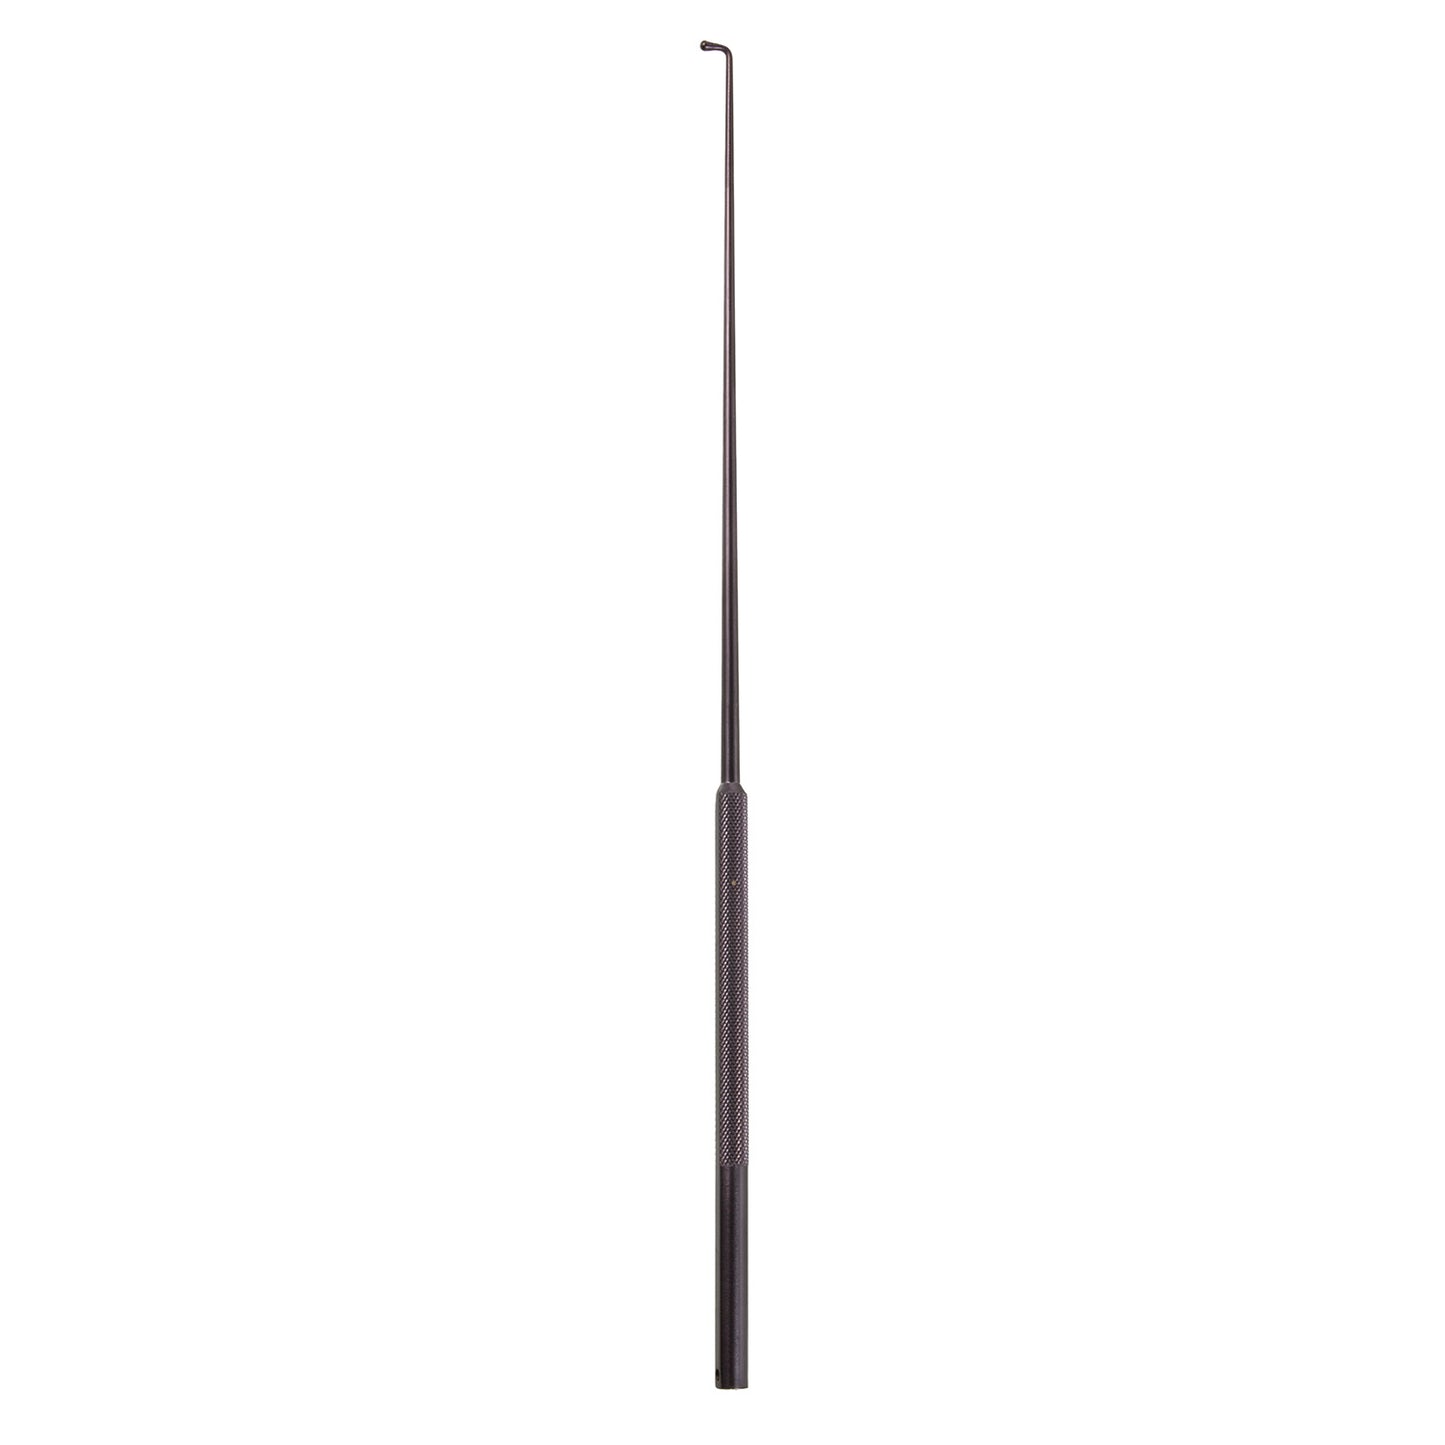 Spinal Probe 5mm tip angled 90°